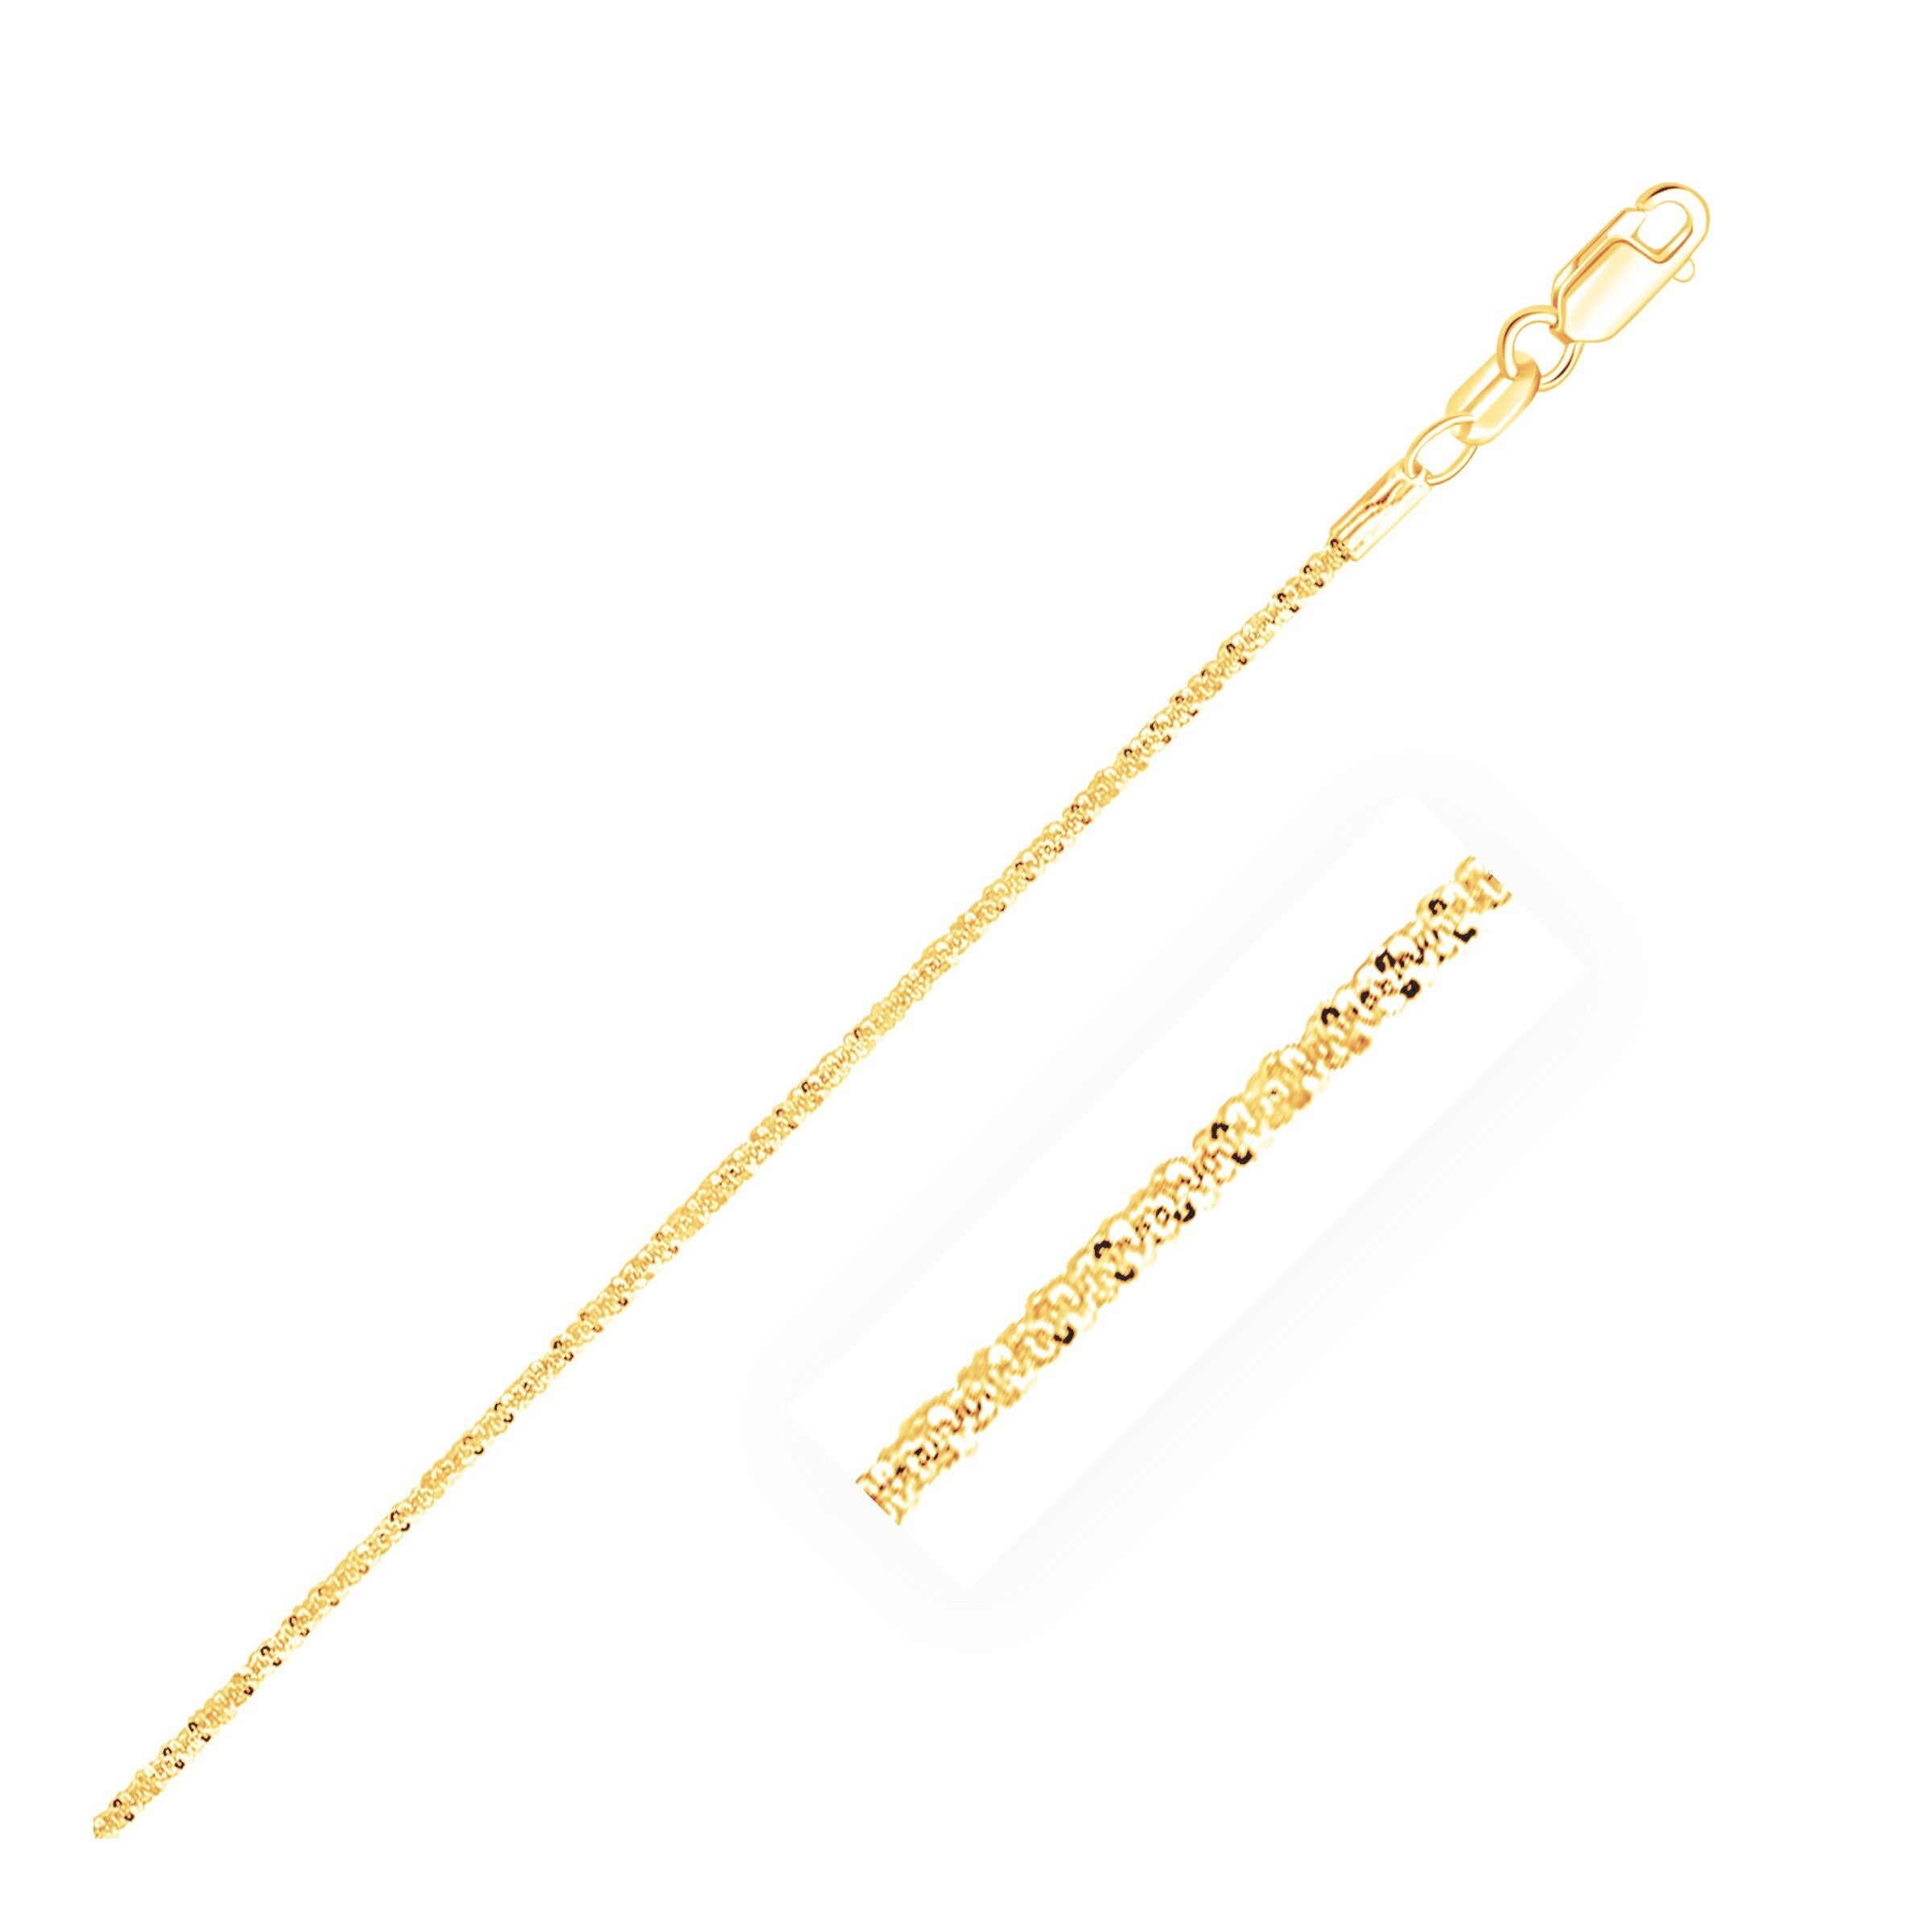 10k Yellow Gold Sparkle Anklet 1.5mm, size 10''